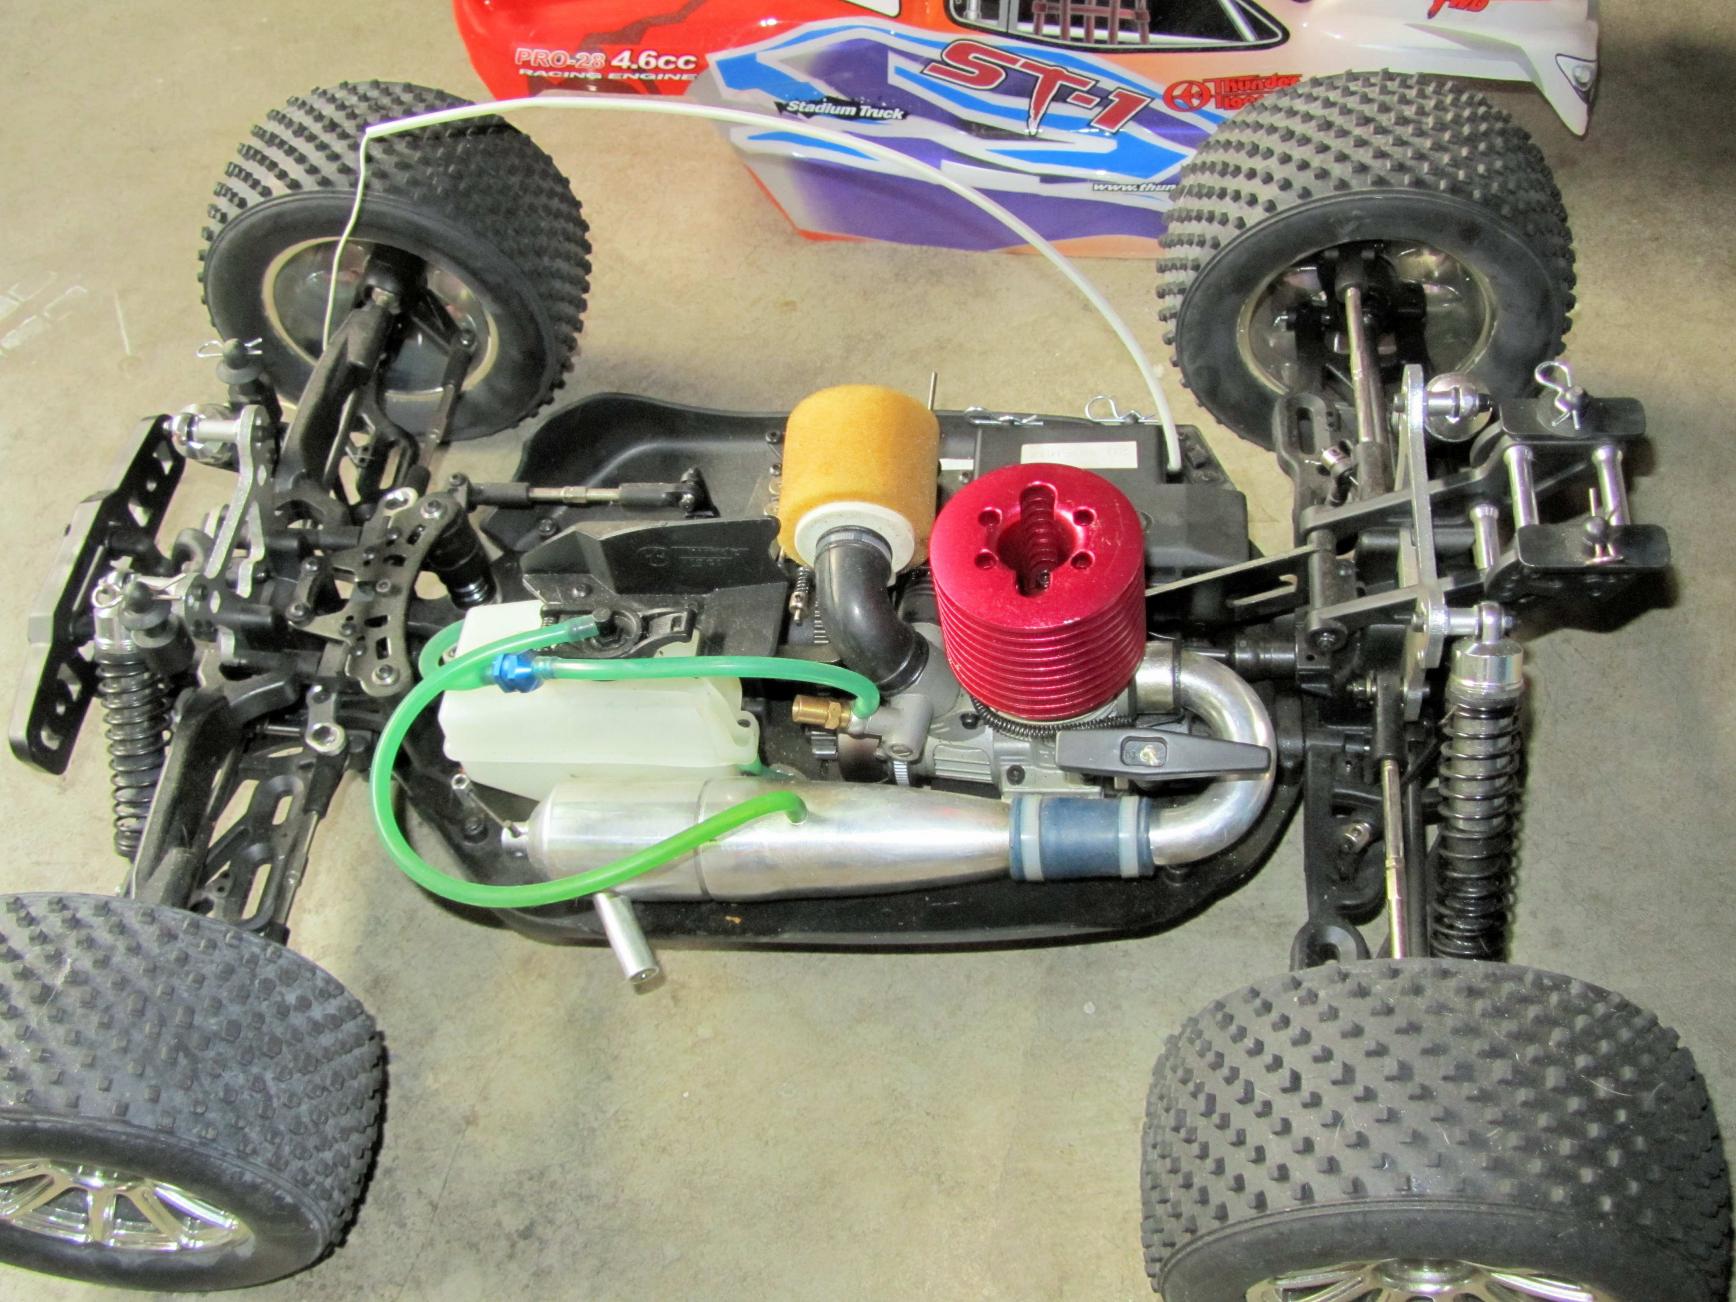 Thunder Tiger St1 RTR / Excellent Condition - R/C Tech Forums